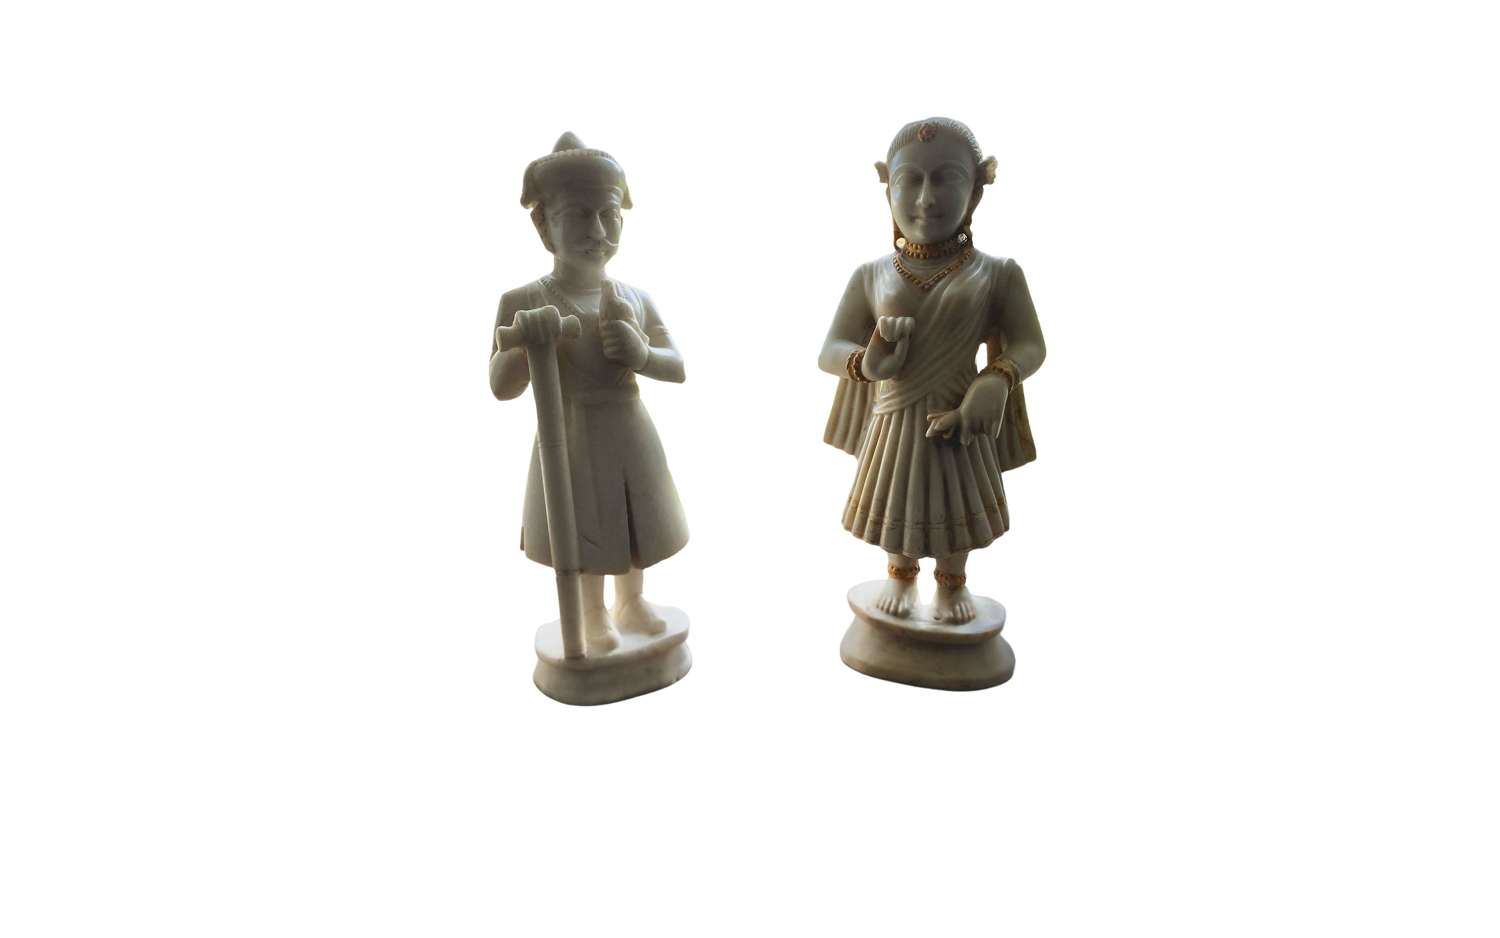 A pair of Carrara white translucent marble 19th-century Indian figures